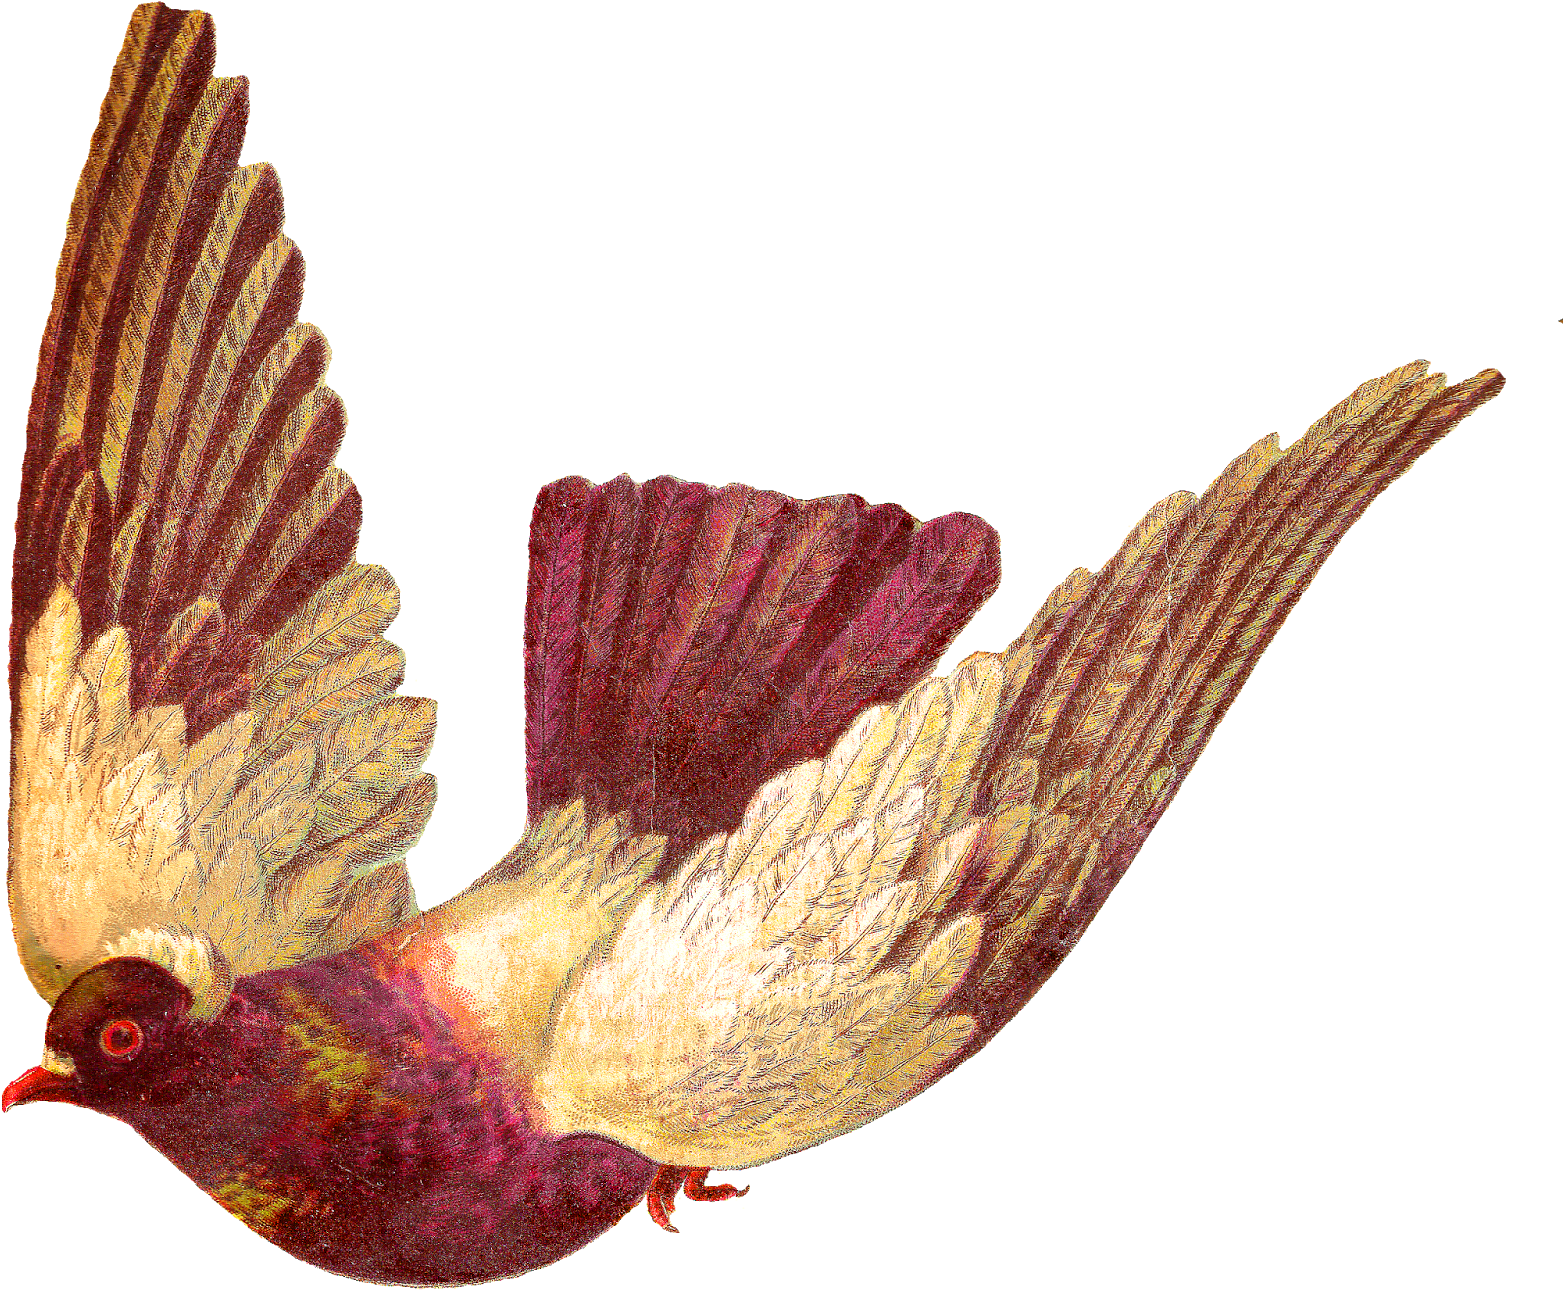 A Bird With Wings Spread